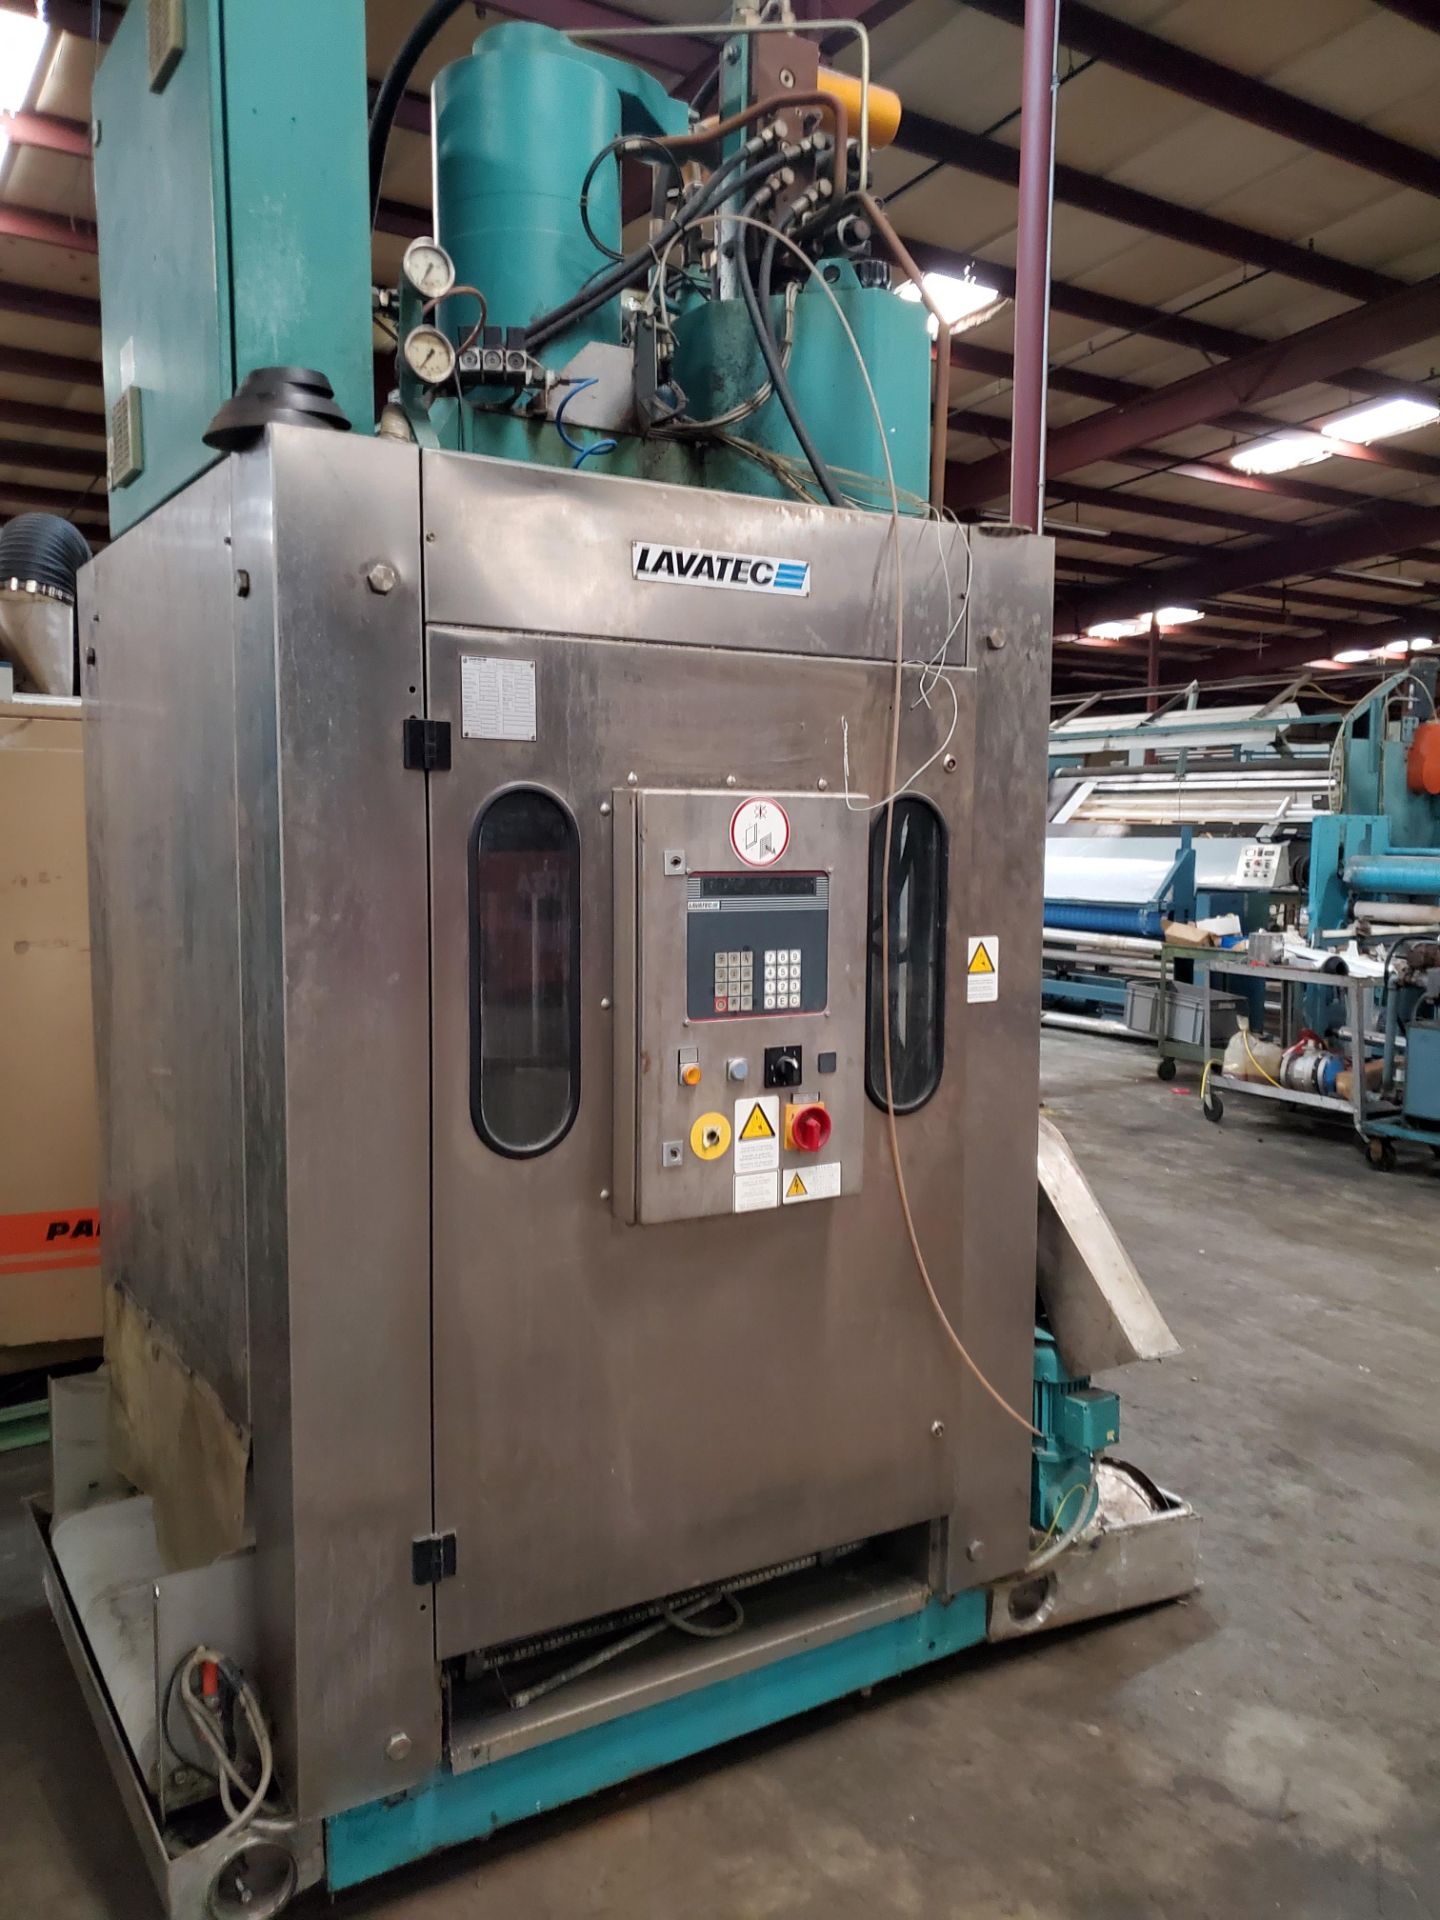 Lavatec Press capacity : 100 lbs./ pression, Condition, excellent, Loading Fee $200